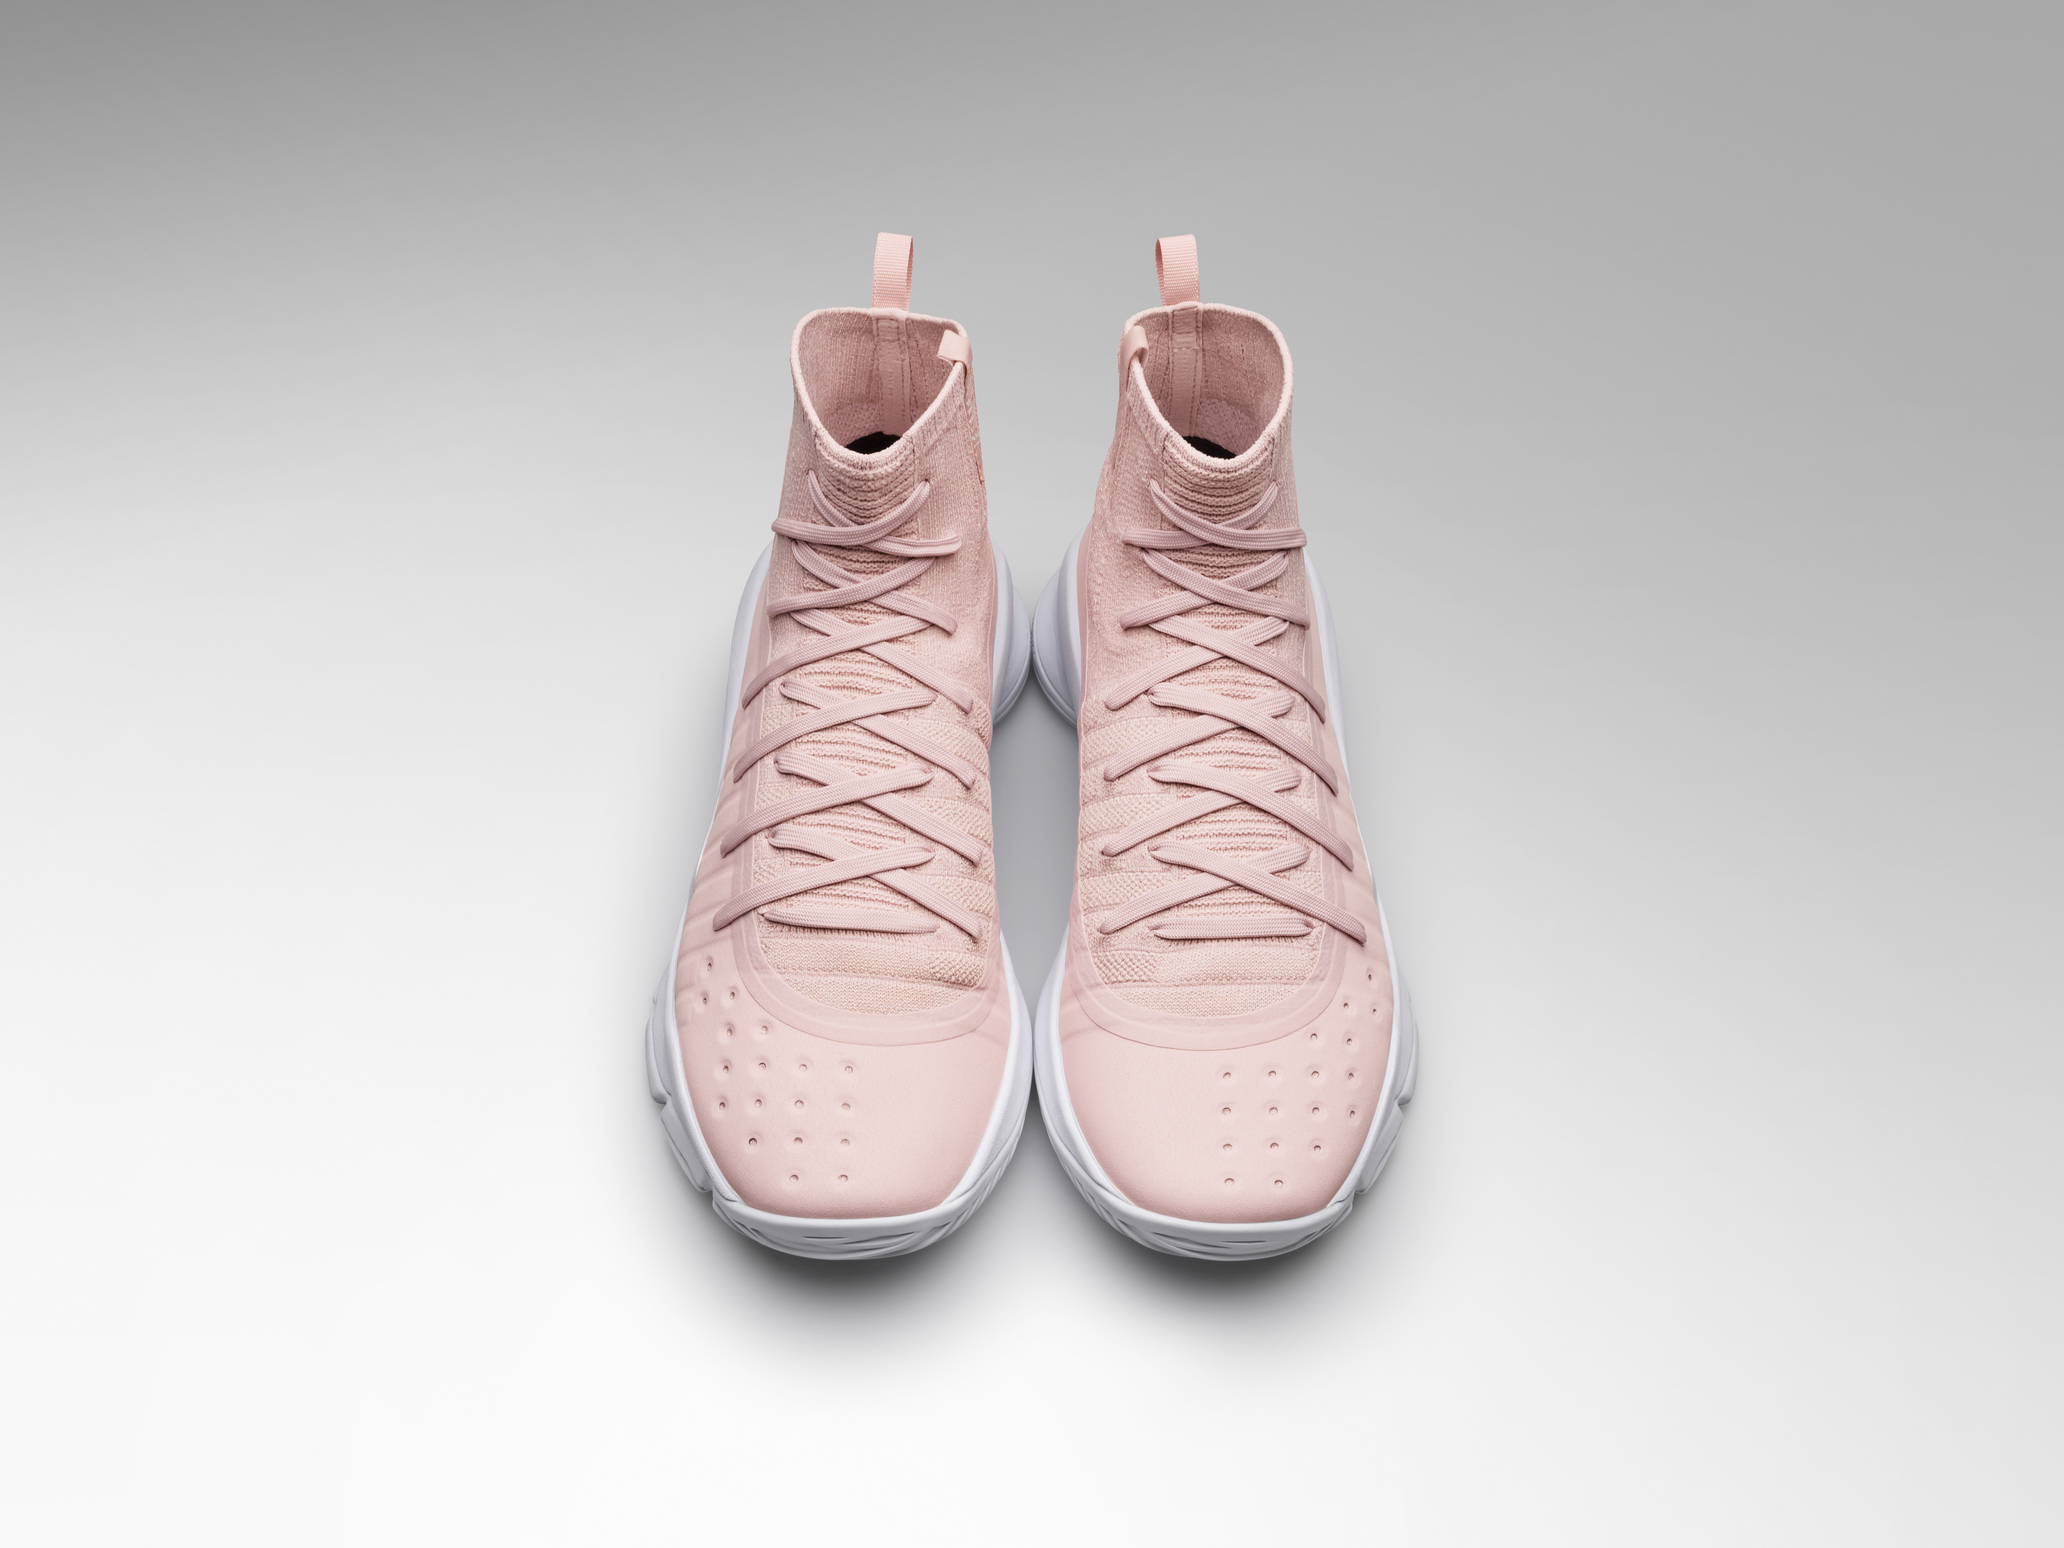 Under Armour Curry 4 Flushed Pink 2